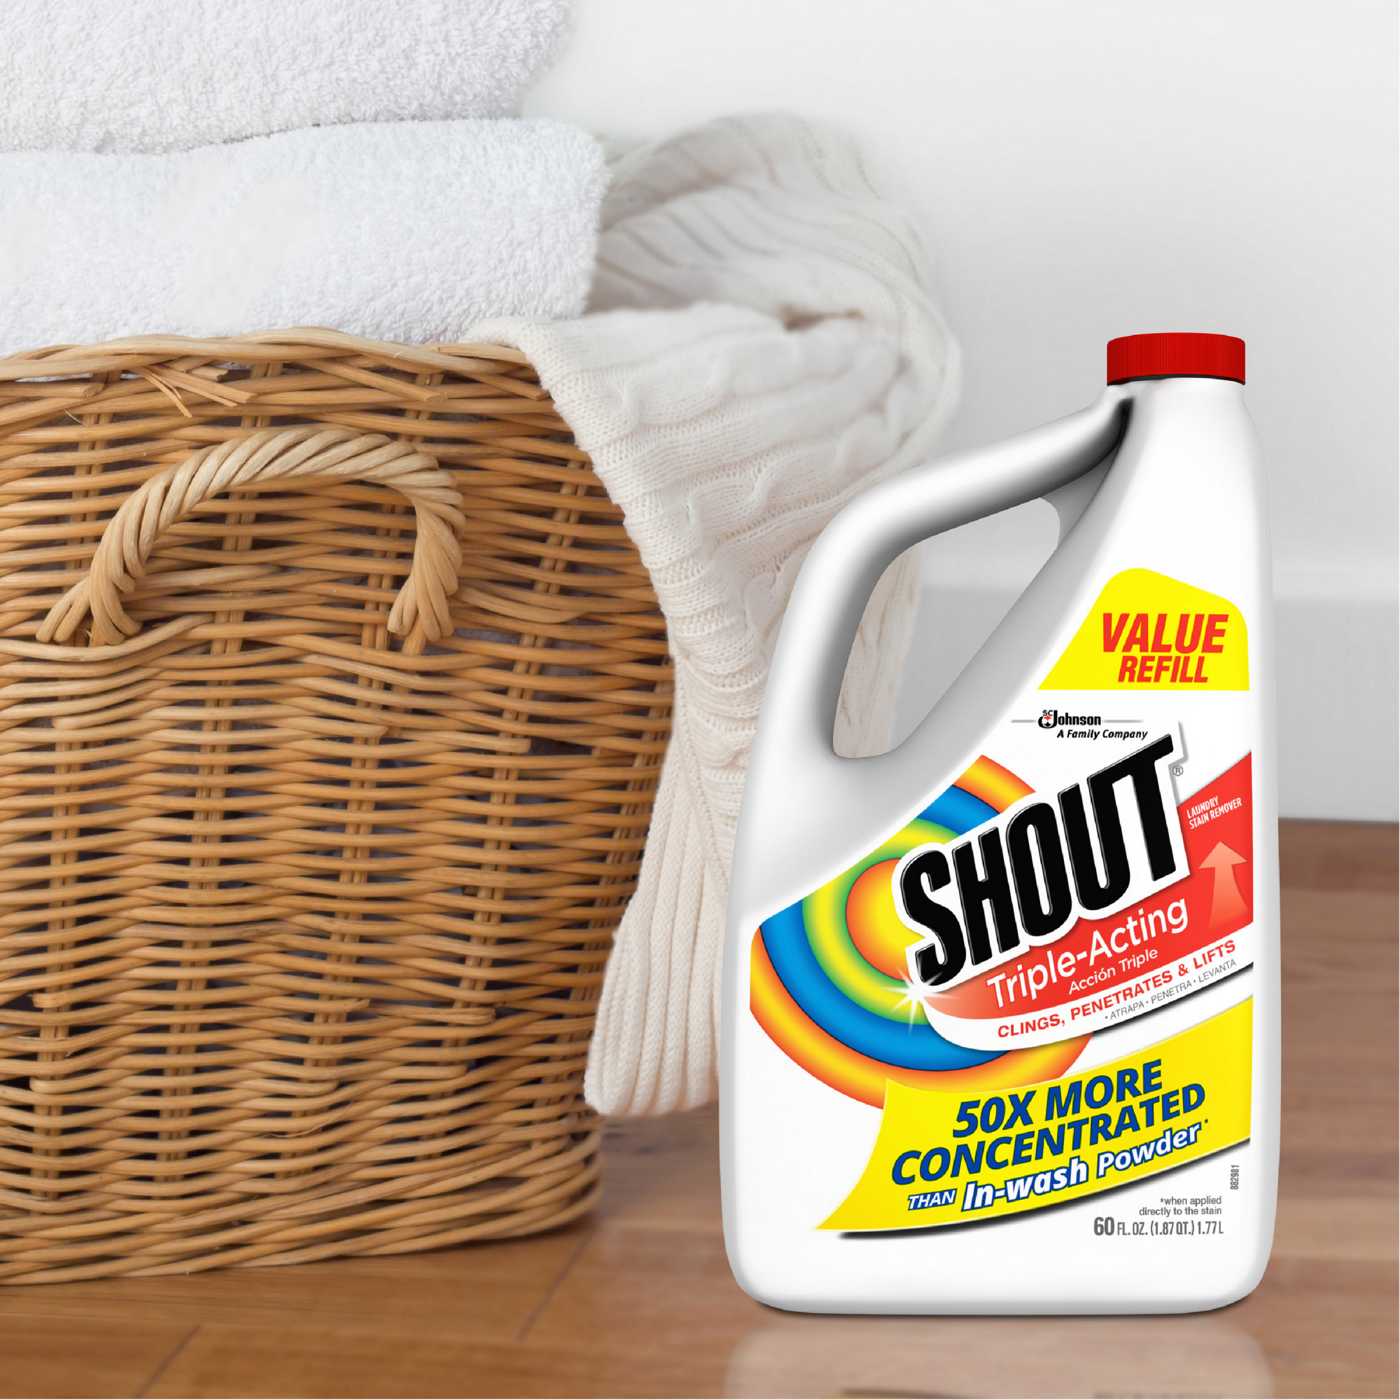 Shout Triple-Acting Laundry Stain Remover Value Size; image 4 of 8